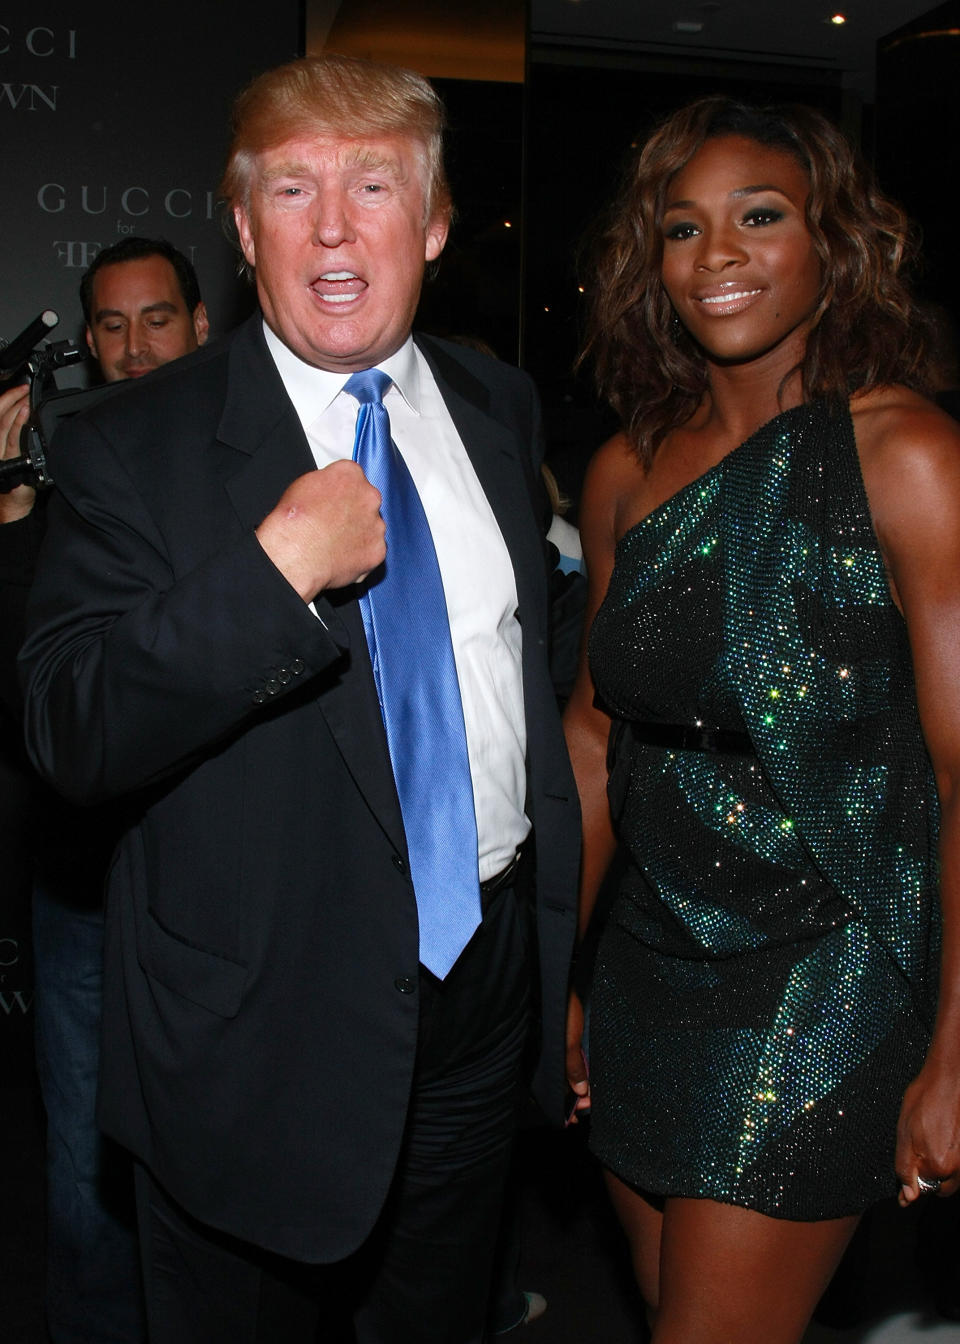 Attending the&nbsp;Gucci for FFAWN Day event alongside Donald Trump&nbsp;on Sept. 16, 2009, in New York City.